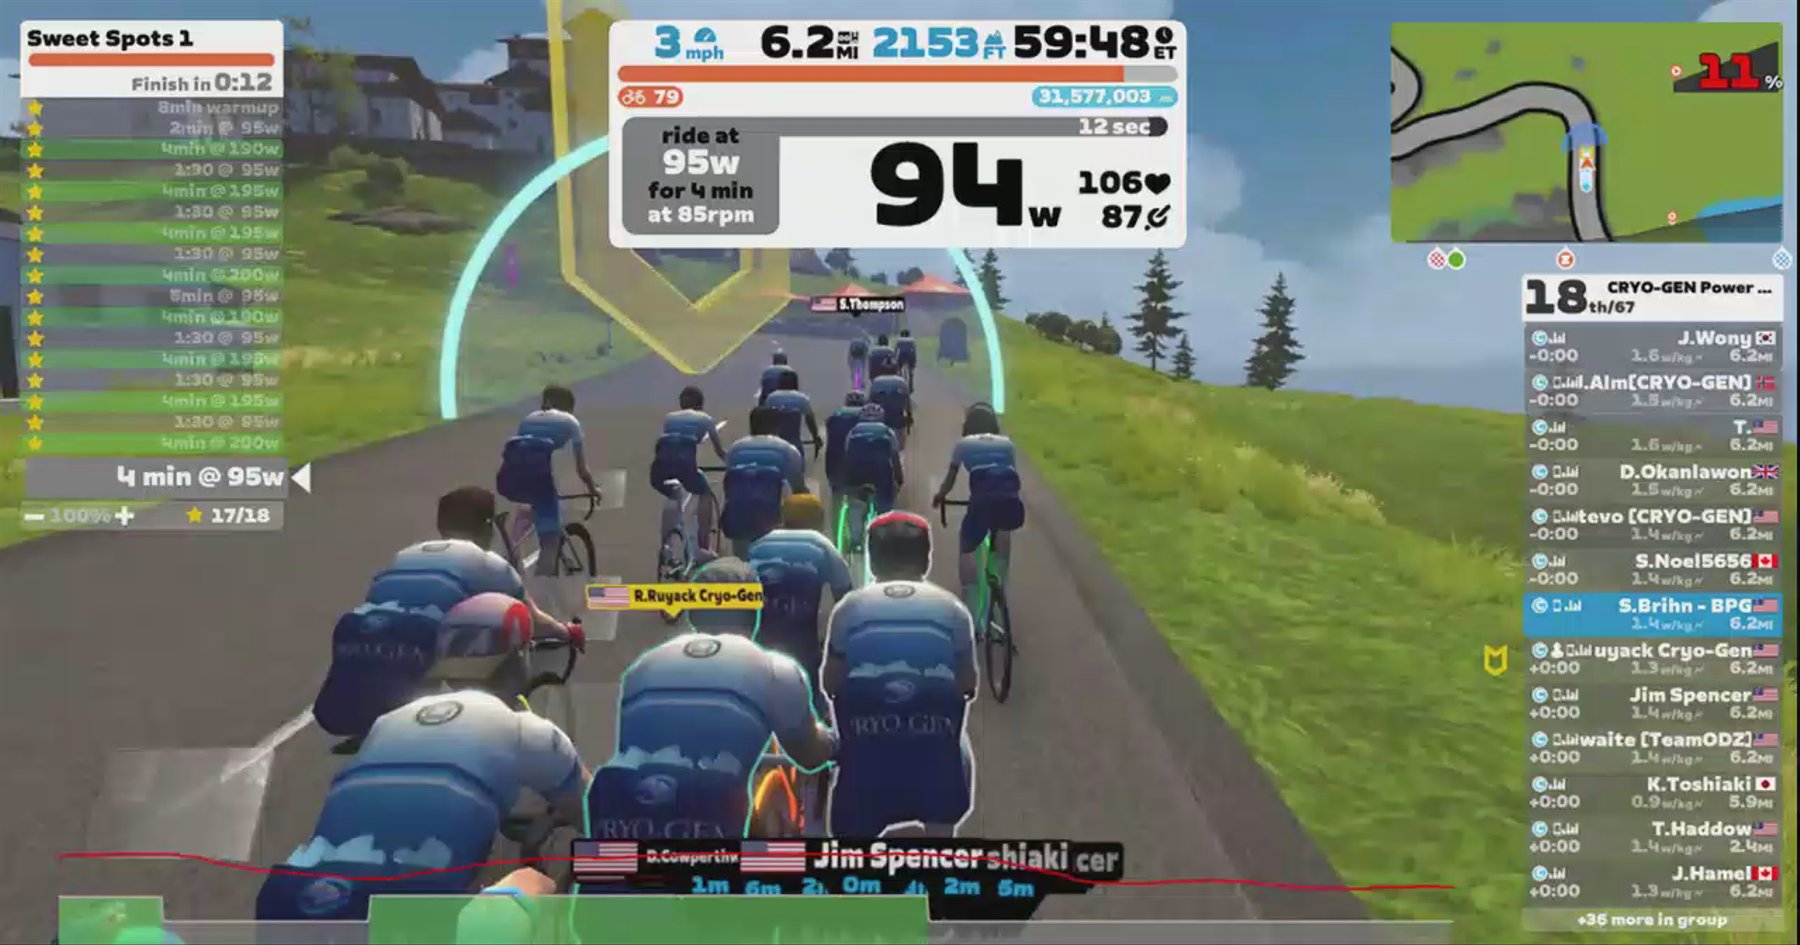 Zwift - Group Ride: CRYO-GEN Power Tuesday Group Ride (C) on Ven-Top in France